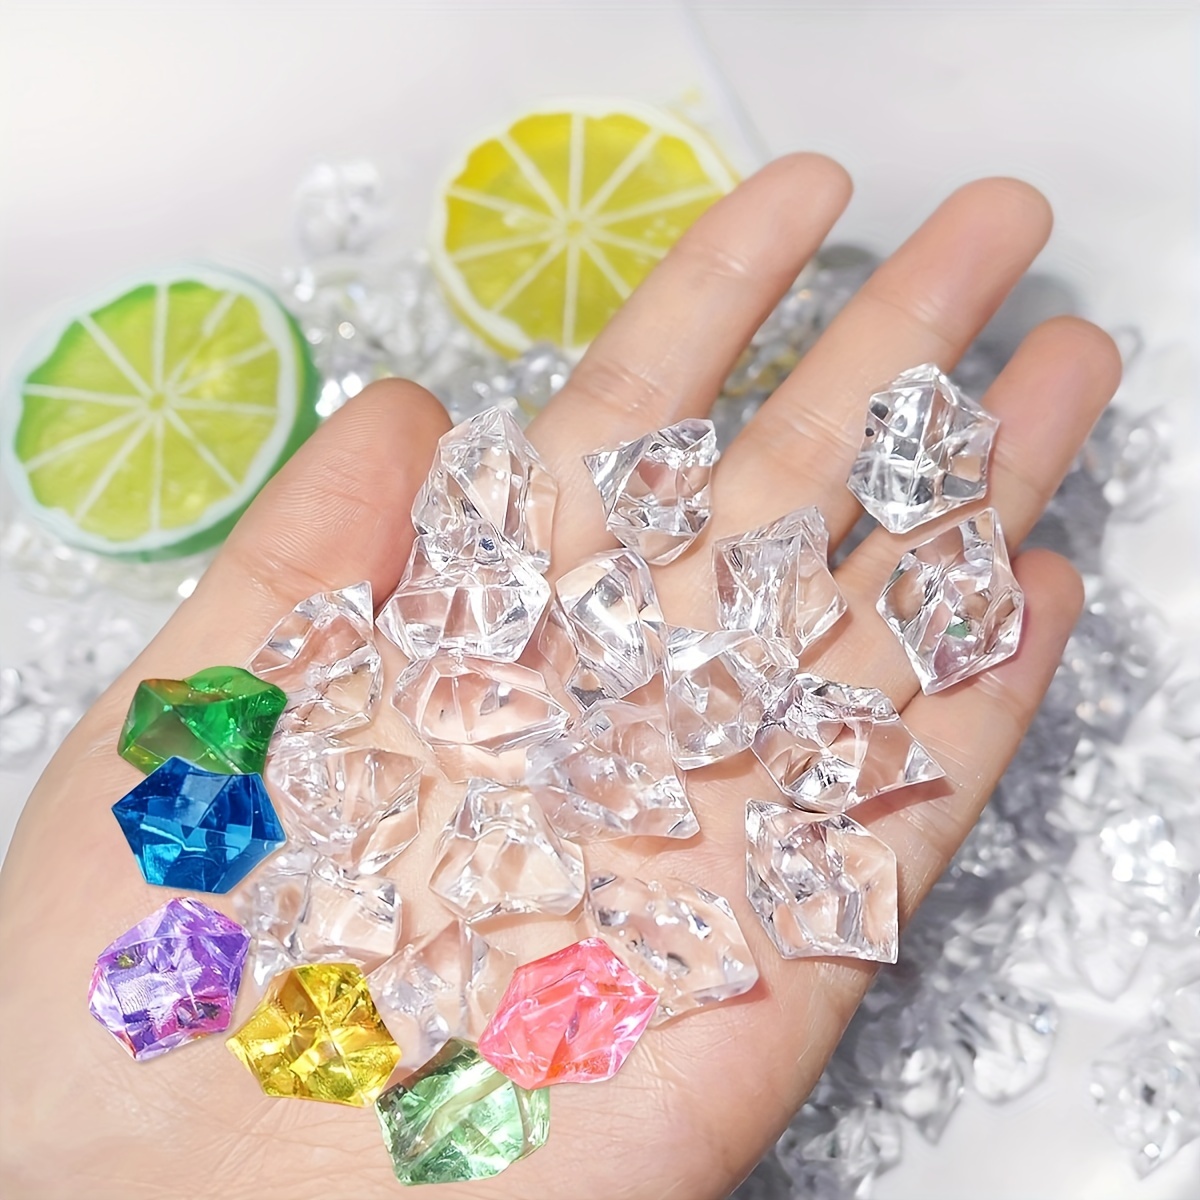 magpross 300 Pieces Plastic Pirate Bulk Faux Diamond Crystals Treasure Gems  Colored Jewels Gems for Tables Decorations, Vase Fillers,Wedding or